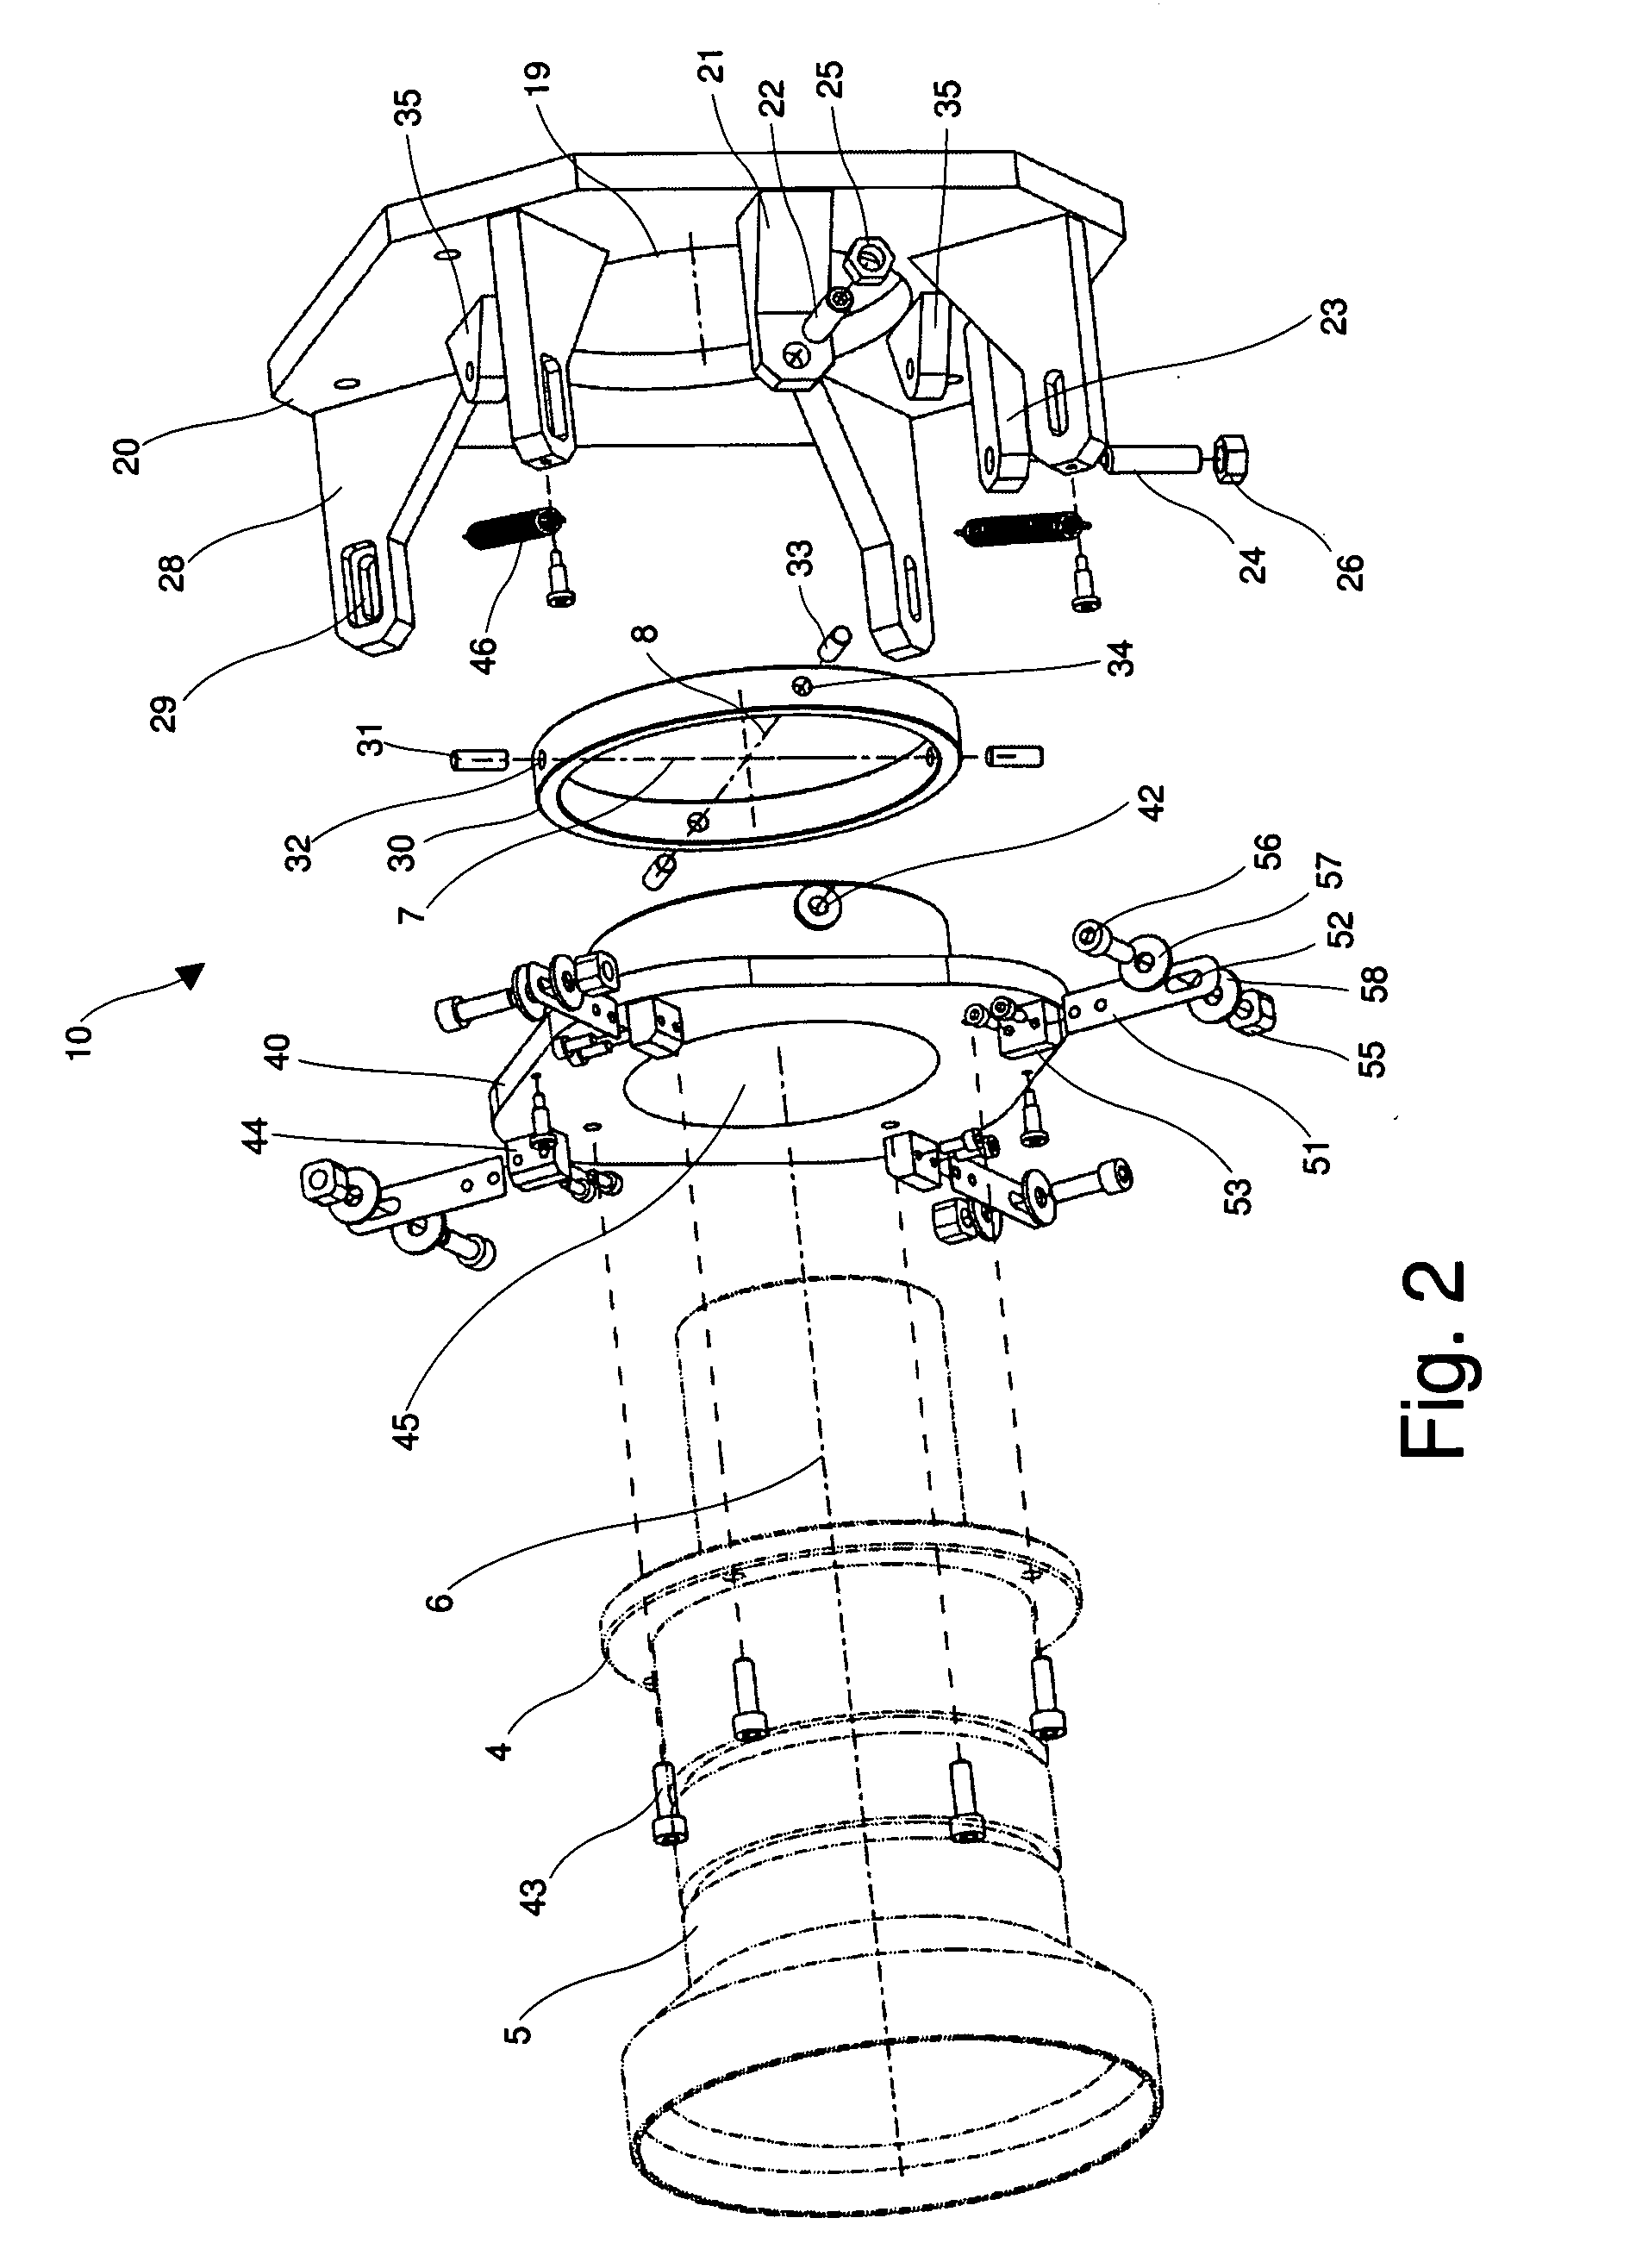 Position adjustment system for a projection lens